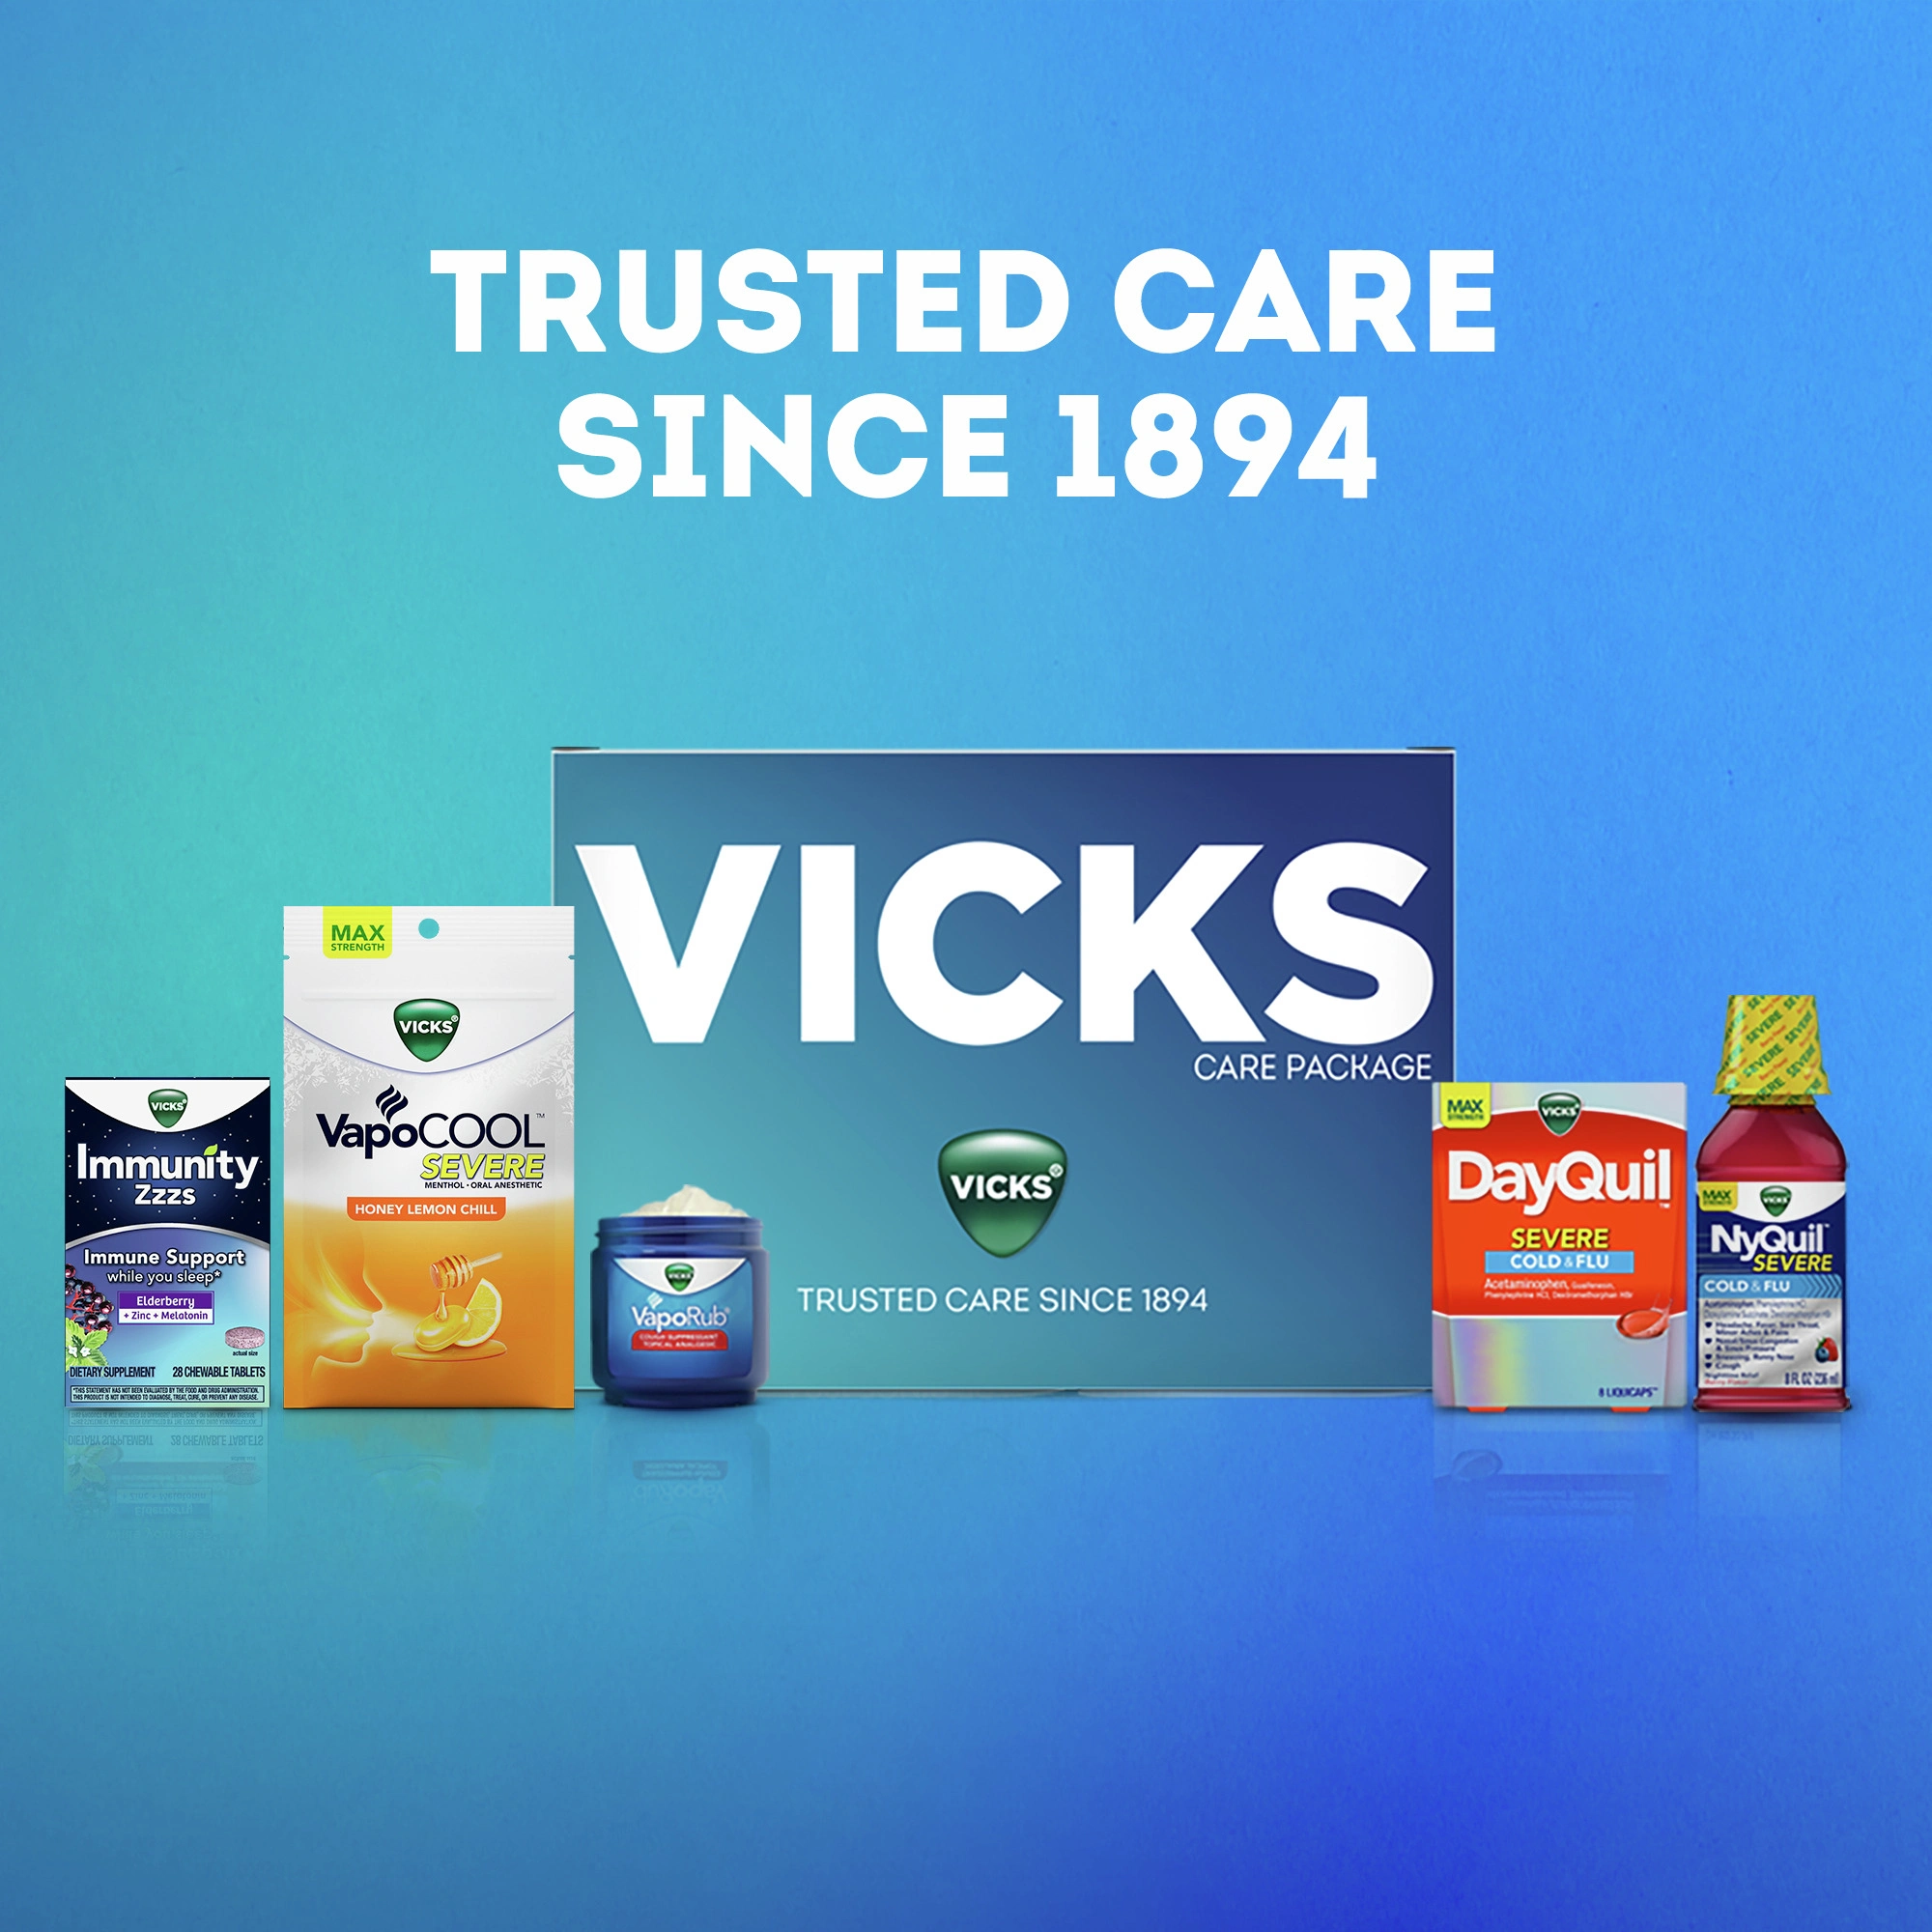 VICKS CARE PACKAGE Image 5